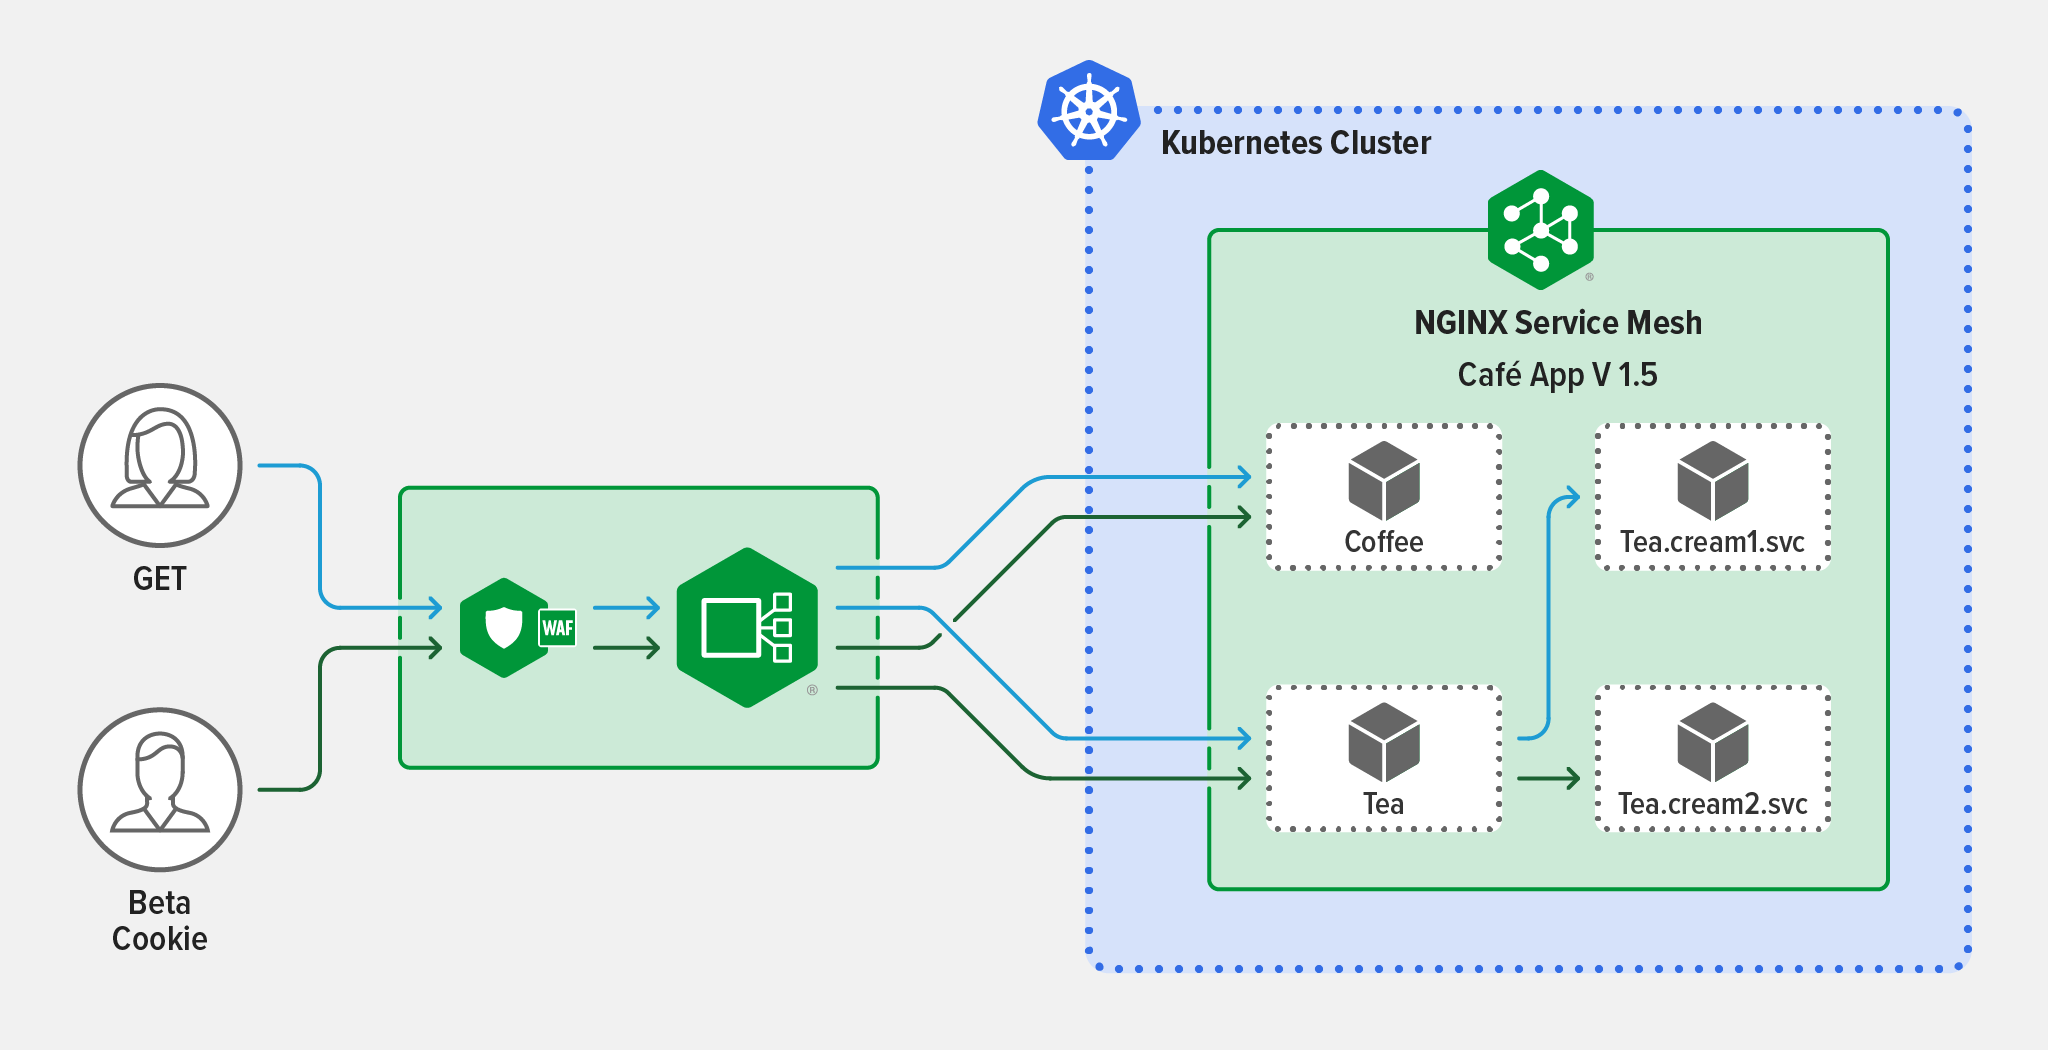 Diagram showing topology for canary deployment using NGINX Service Mesh